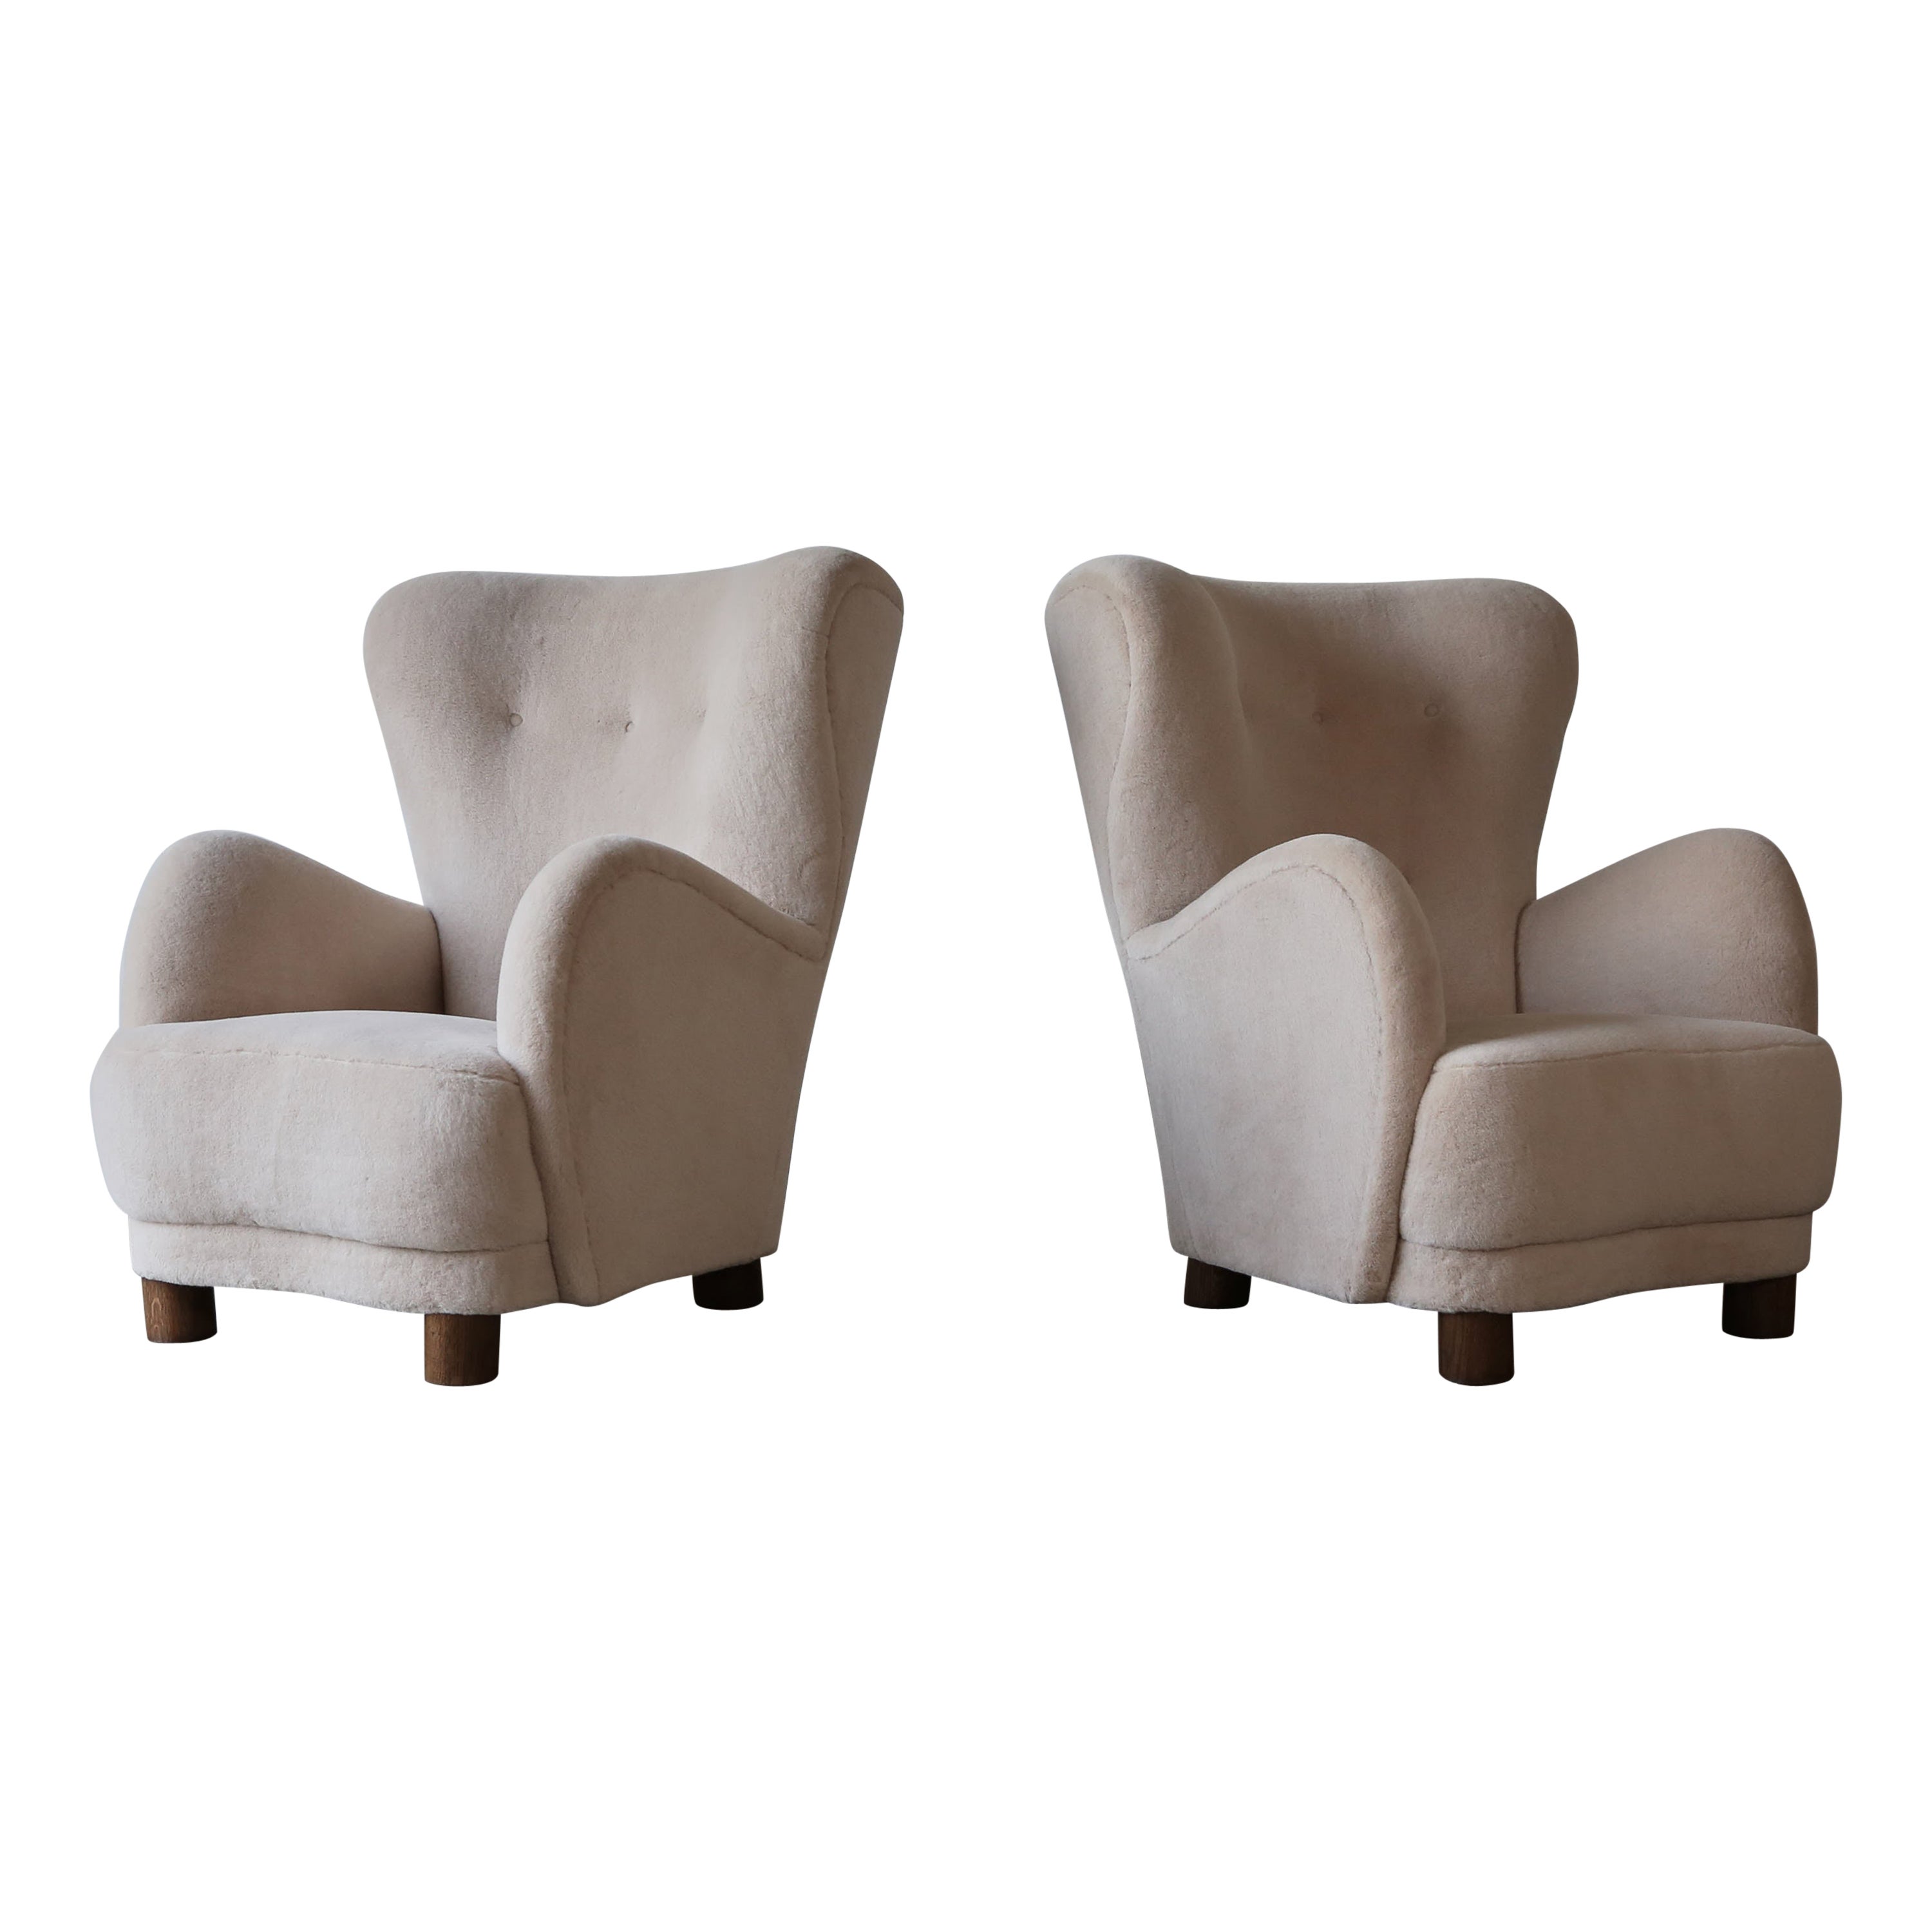 A Pair of High Back Arm Chairs, Upholstered in Pure Alpaca